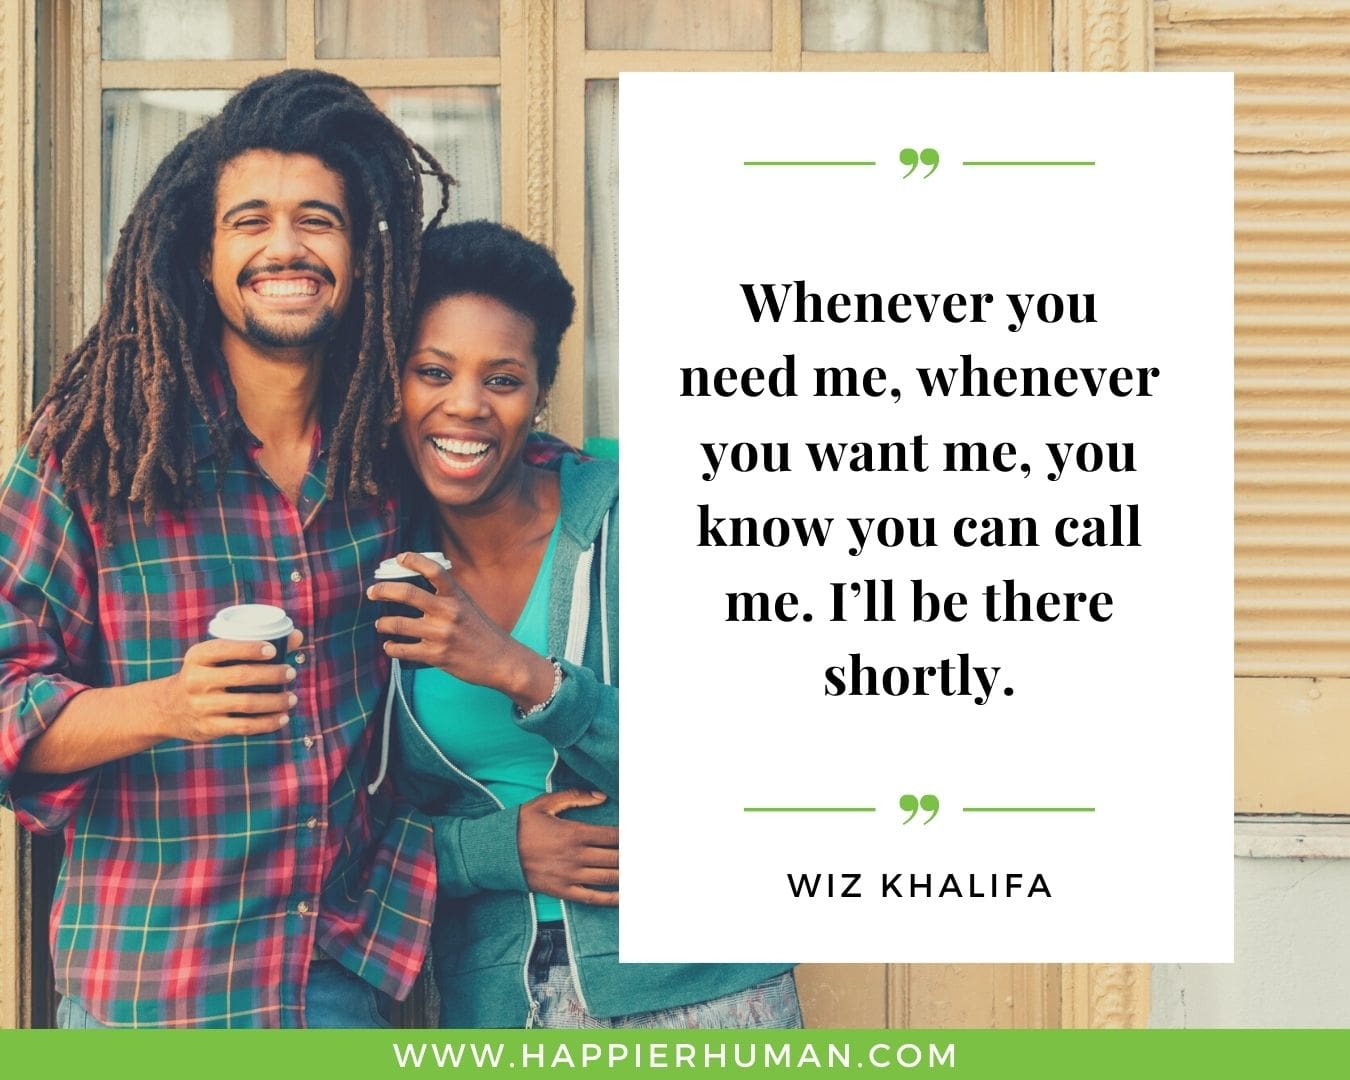 I’m Here for You Quotes - “Whenever you need me, whenever you want me, you know you can call me. I’ll be there shortly.” – Wiz Khalifa